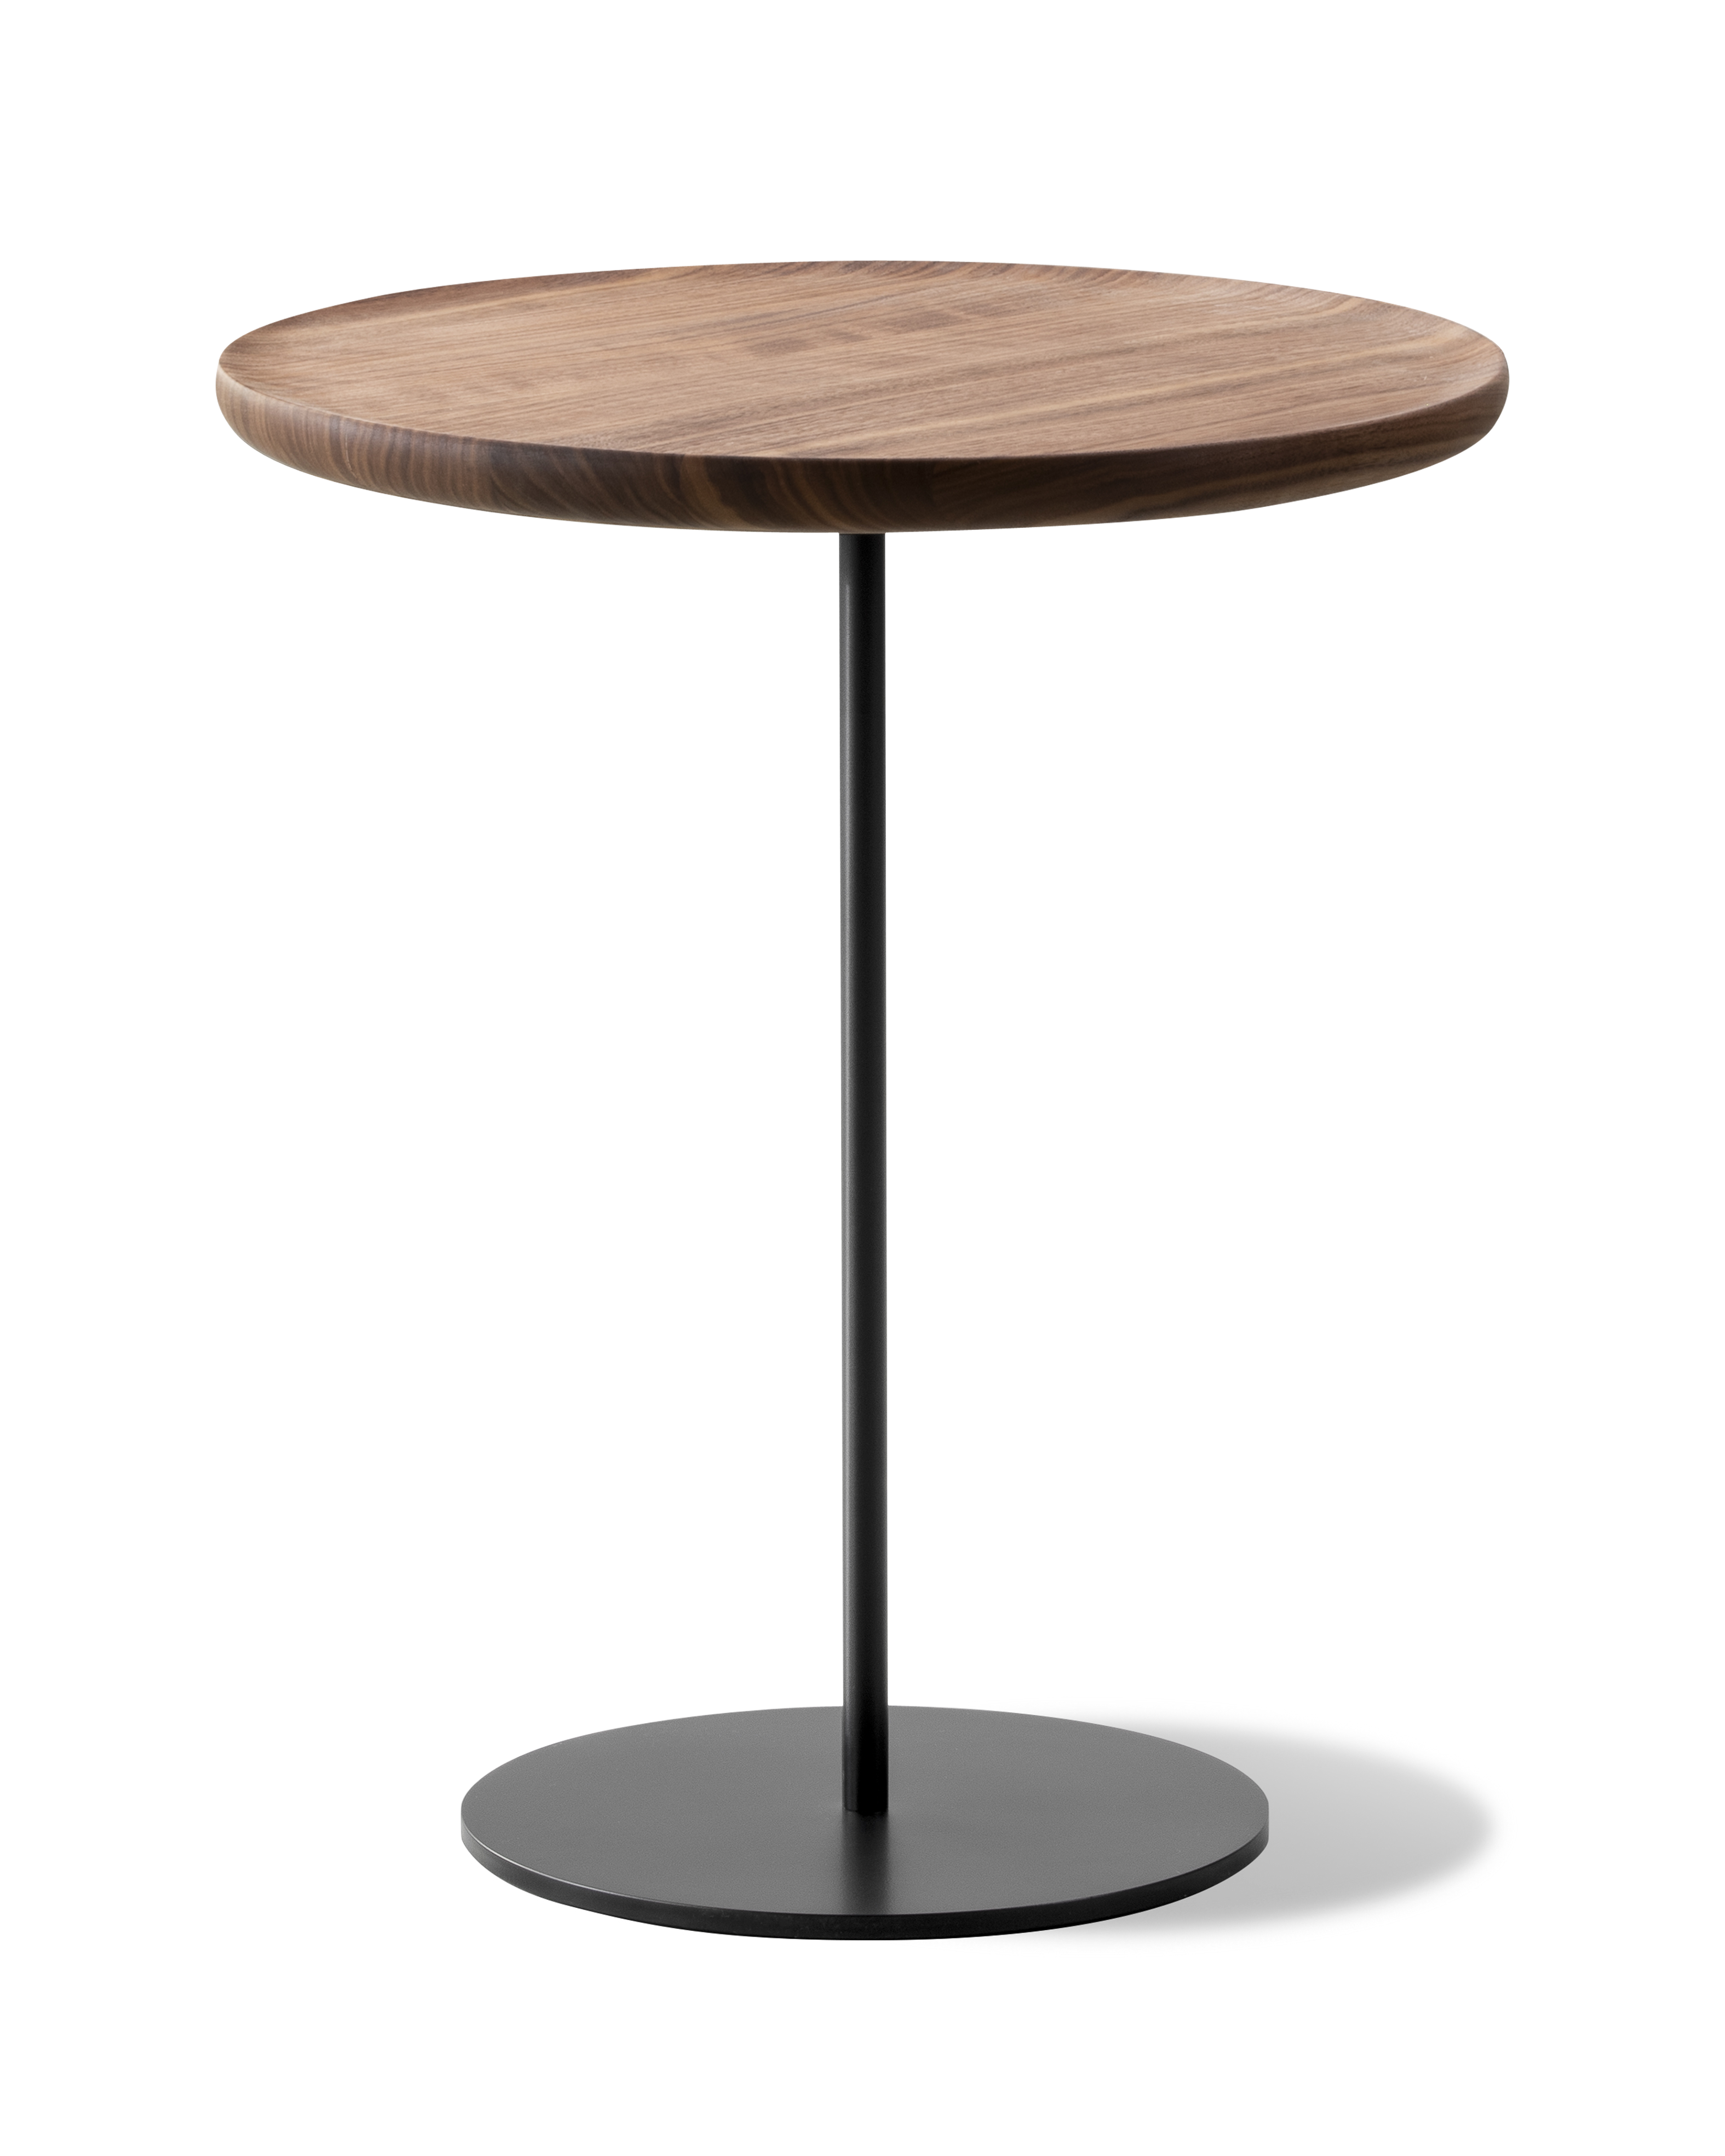 Pal Table - Walnut / Black lacquered steel